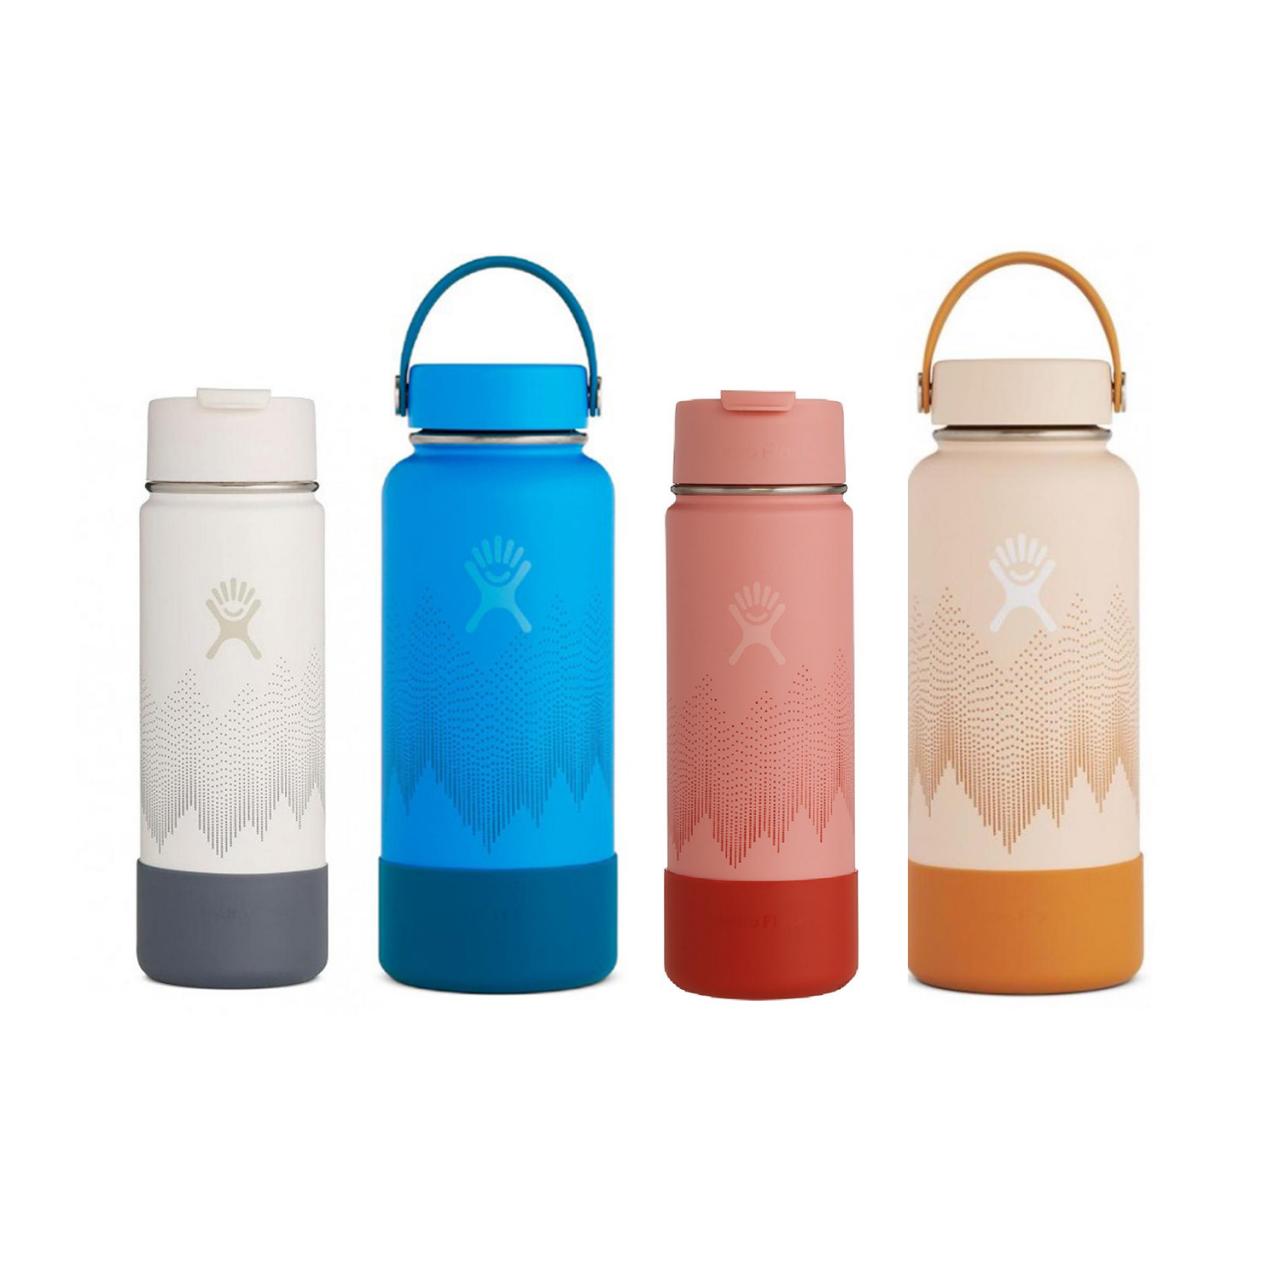 https://food.fnr.sndimg.com/content/dam/images/food/products/2019/12/2/rx_hydroflask-wander-series.jpg.rend.hgtvcom.1280.1280.suffix/1575313173880.jpeg